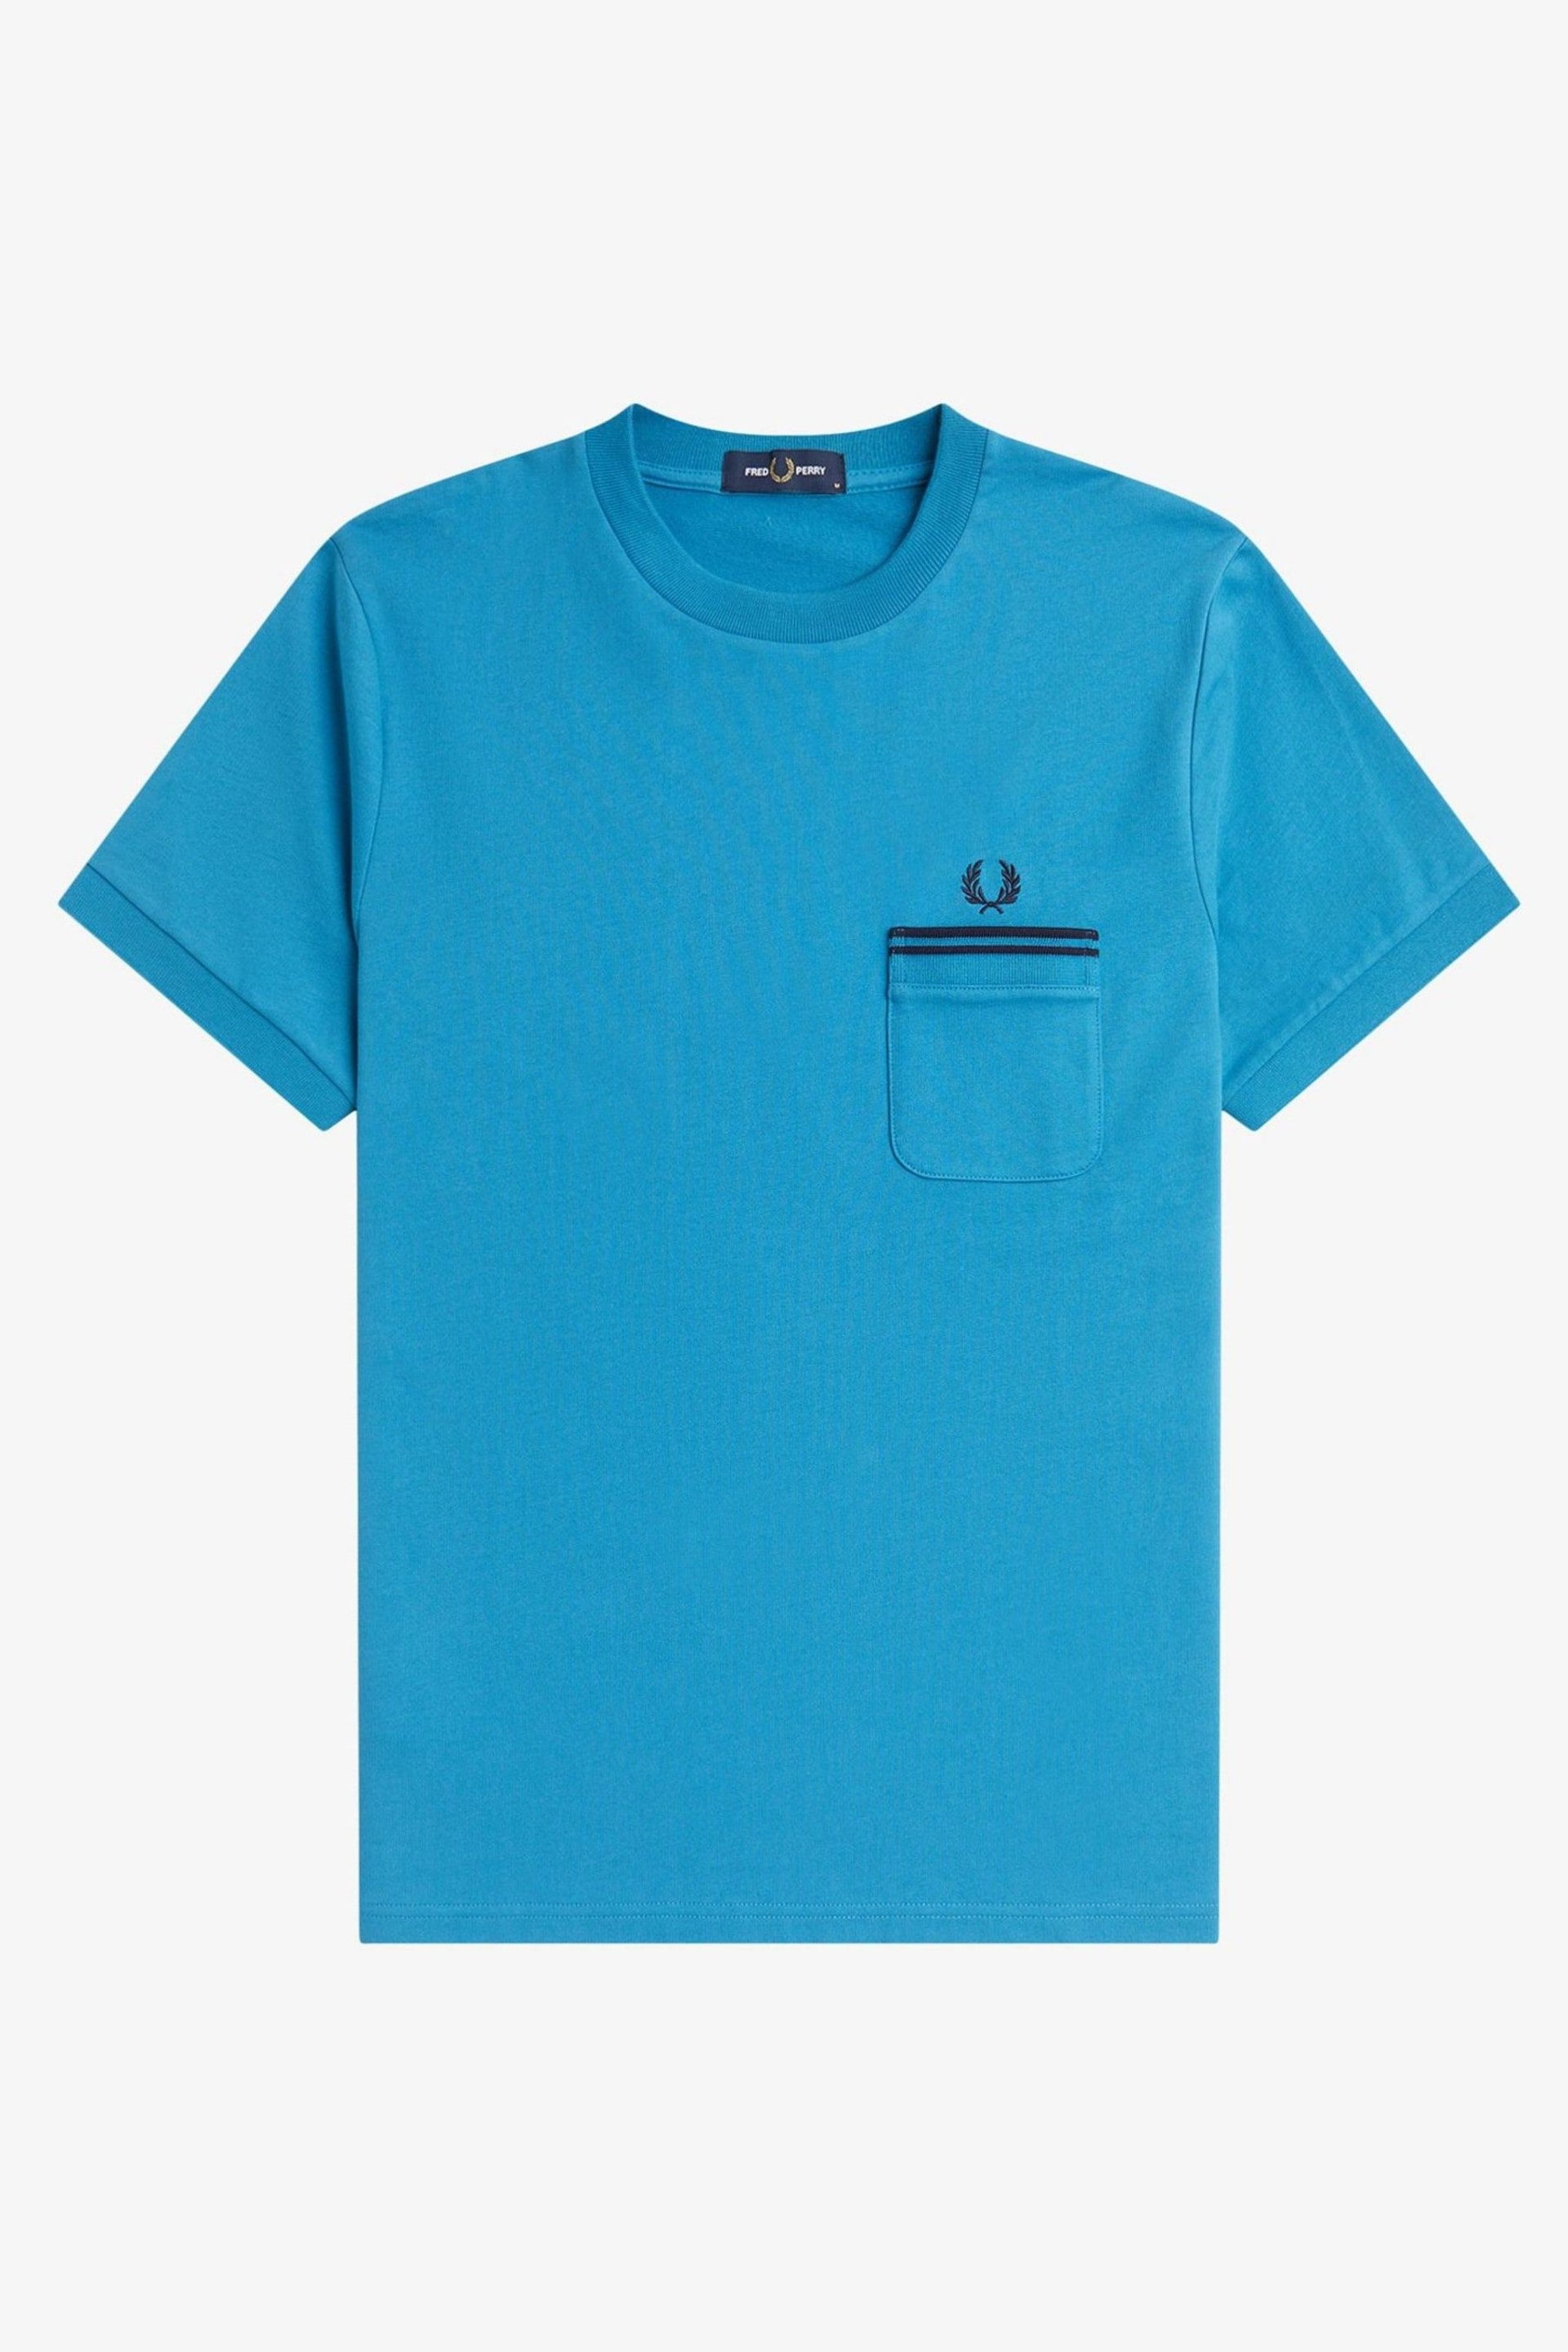 Fred Perry Pocket Detail T-Shirt - Image 1 of 2